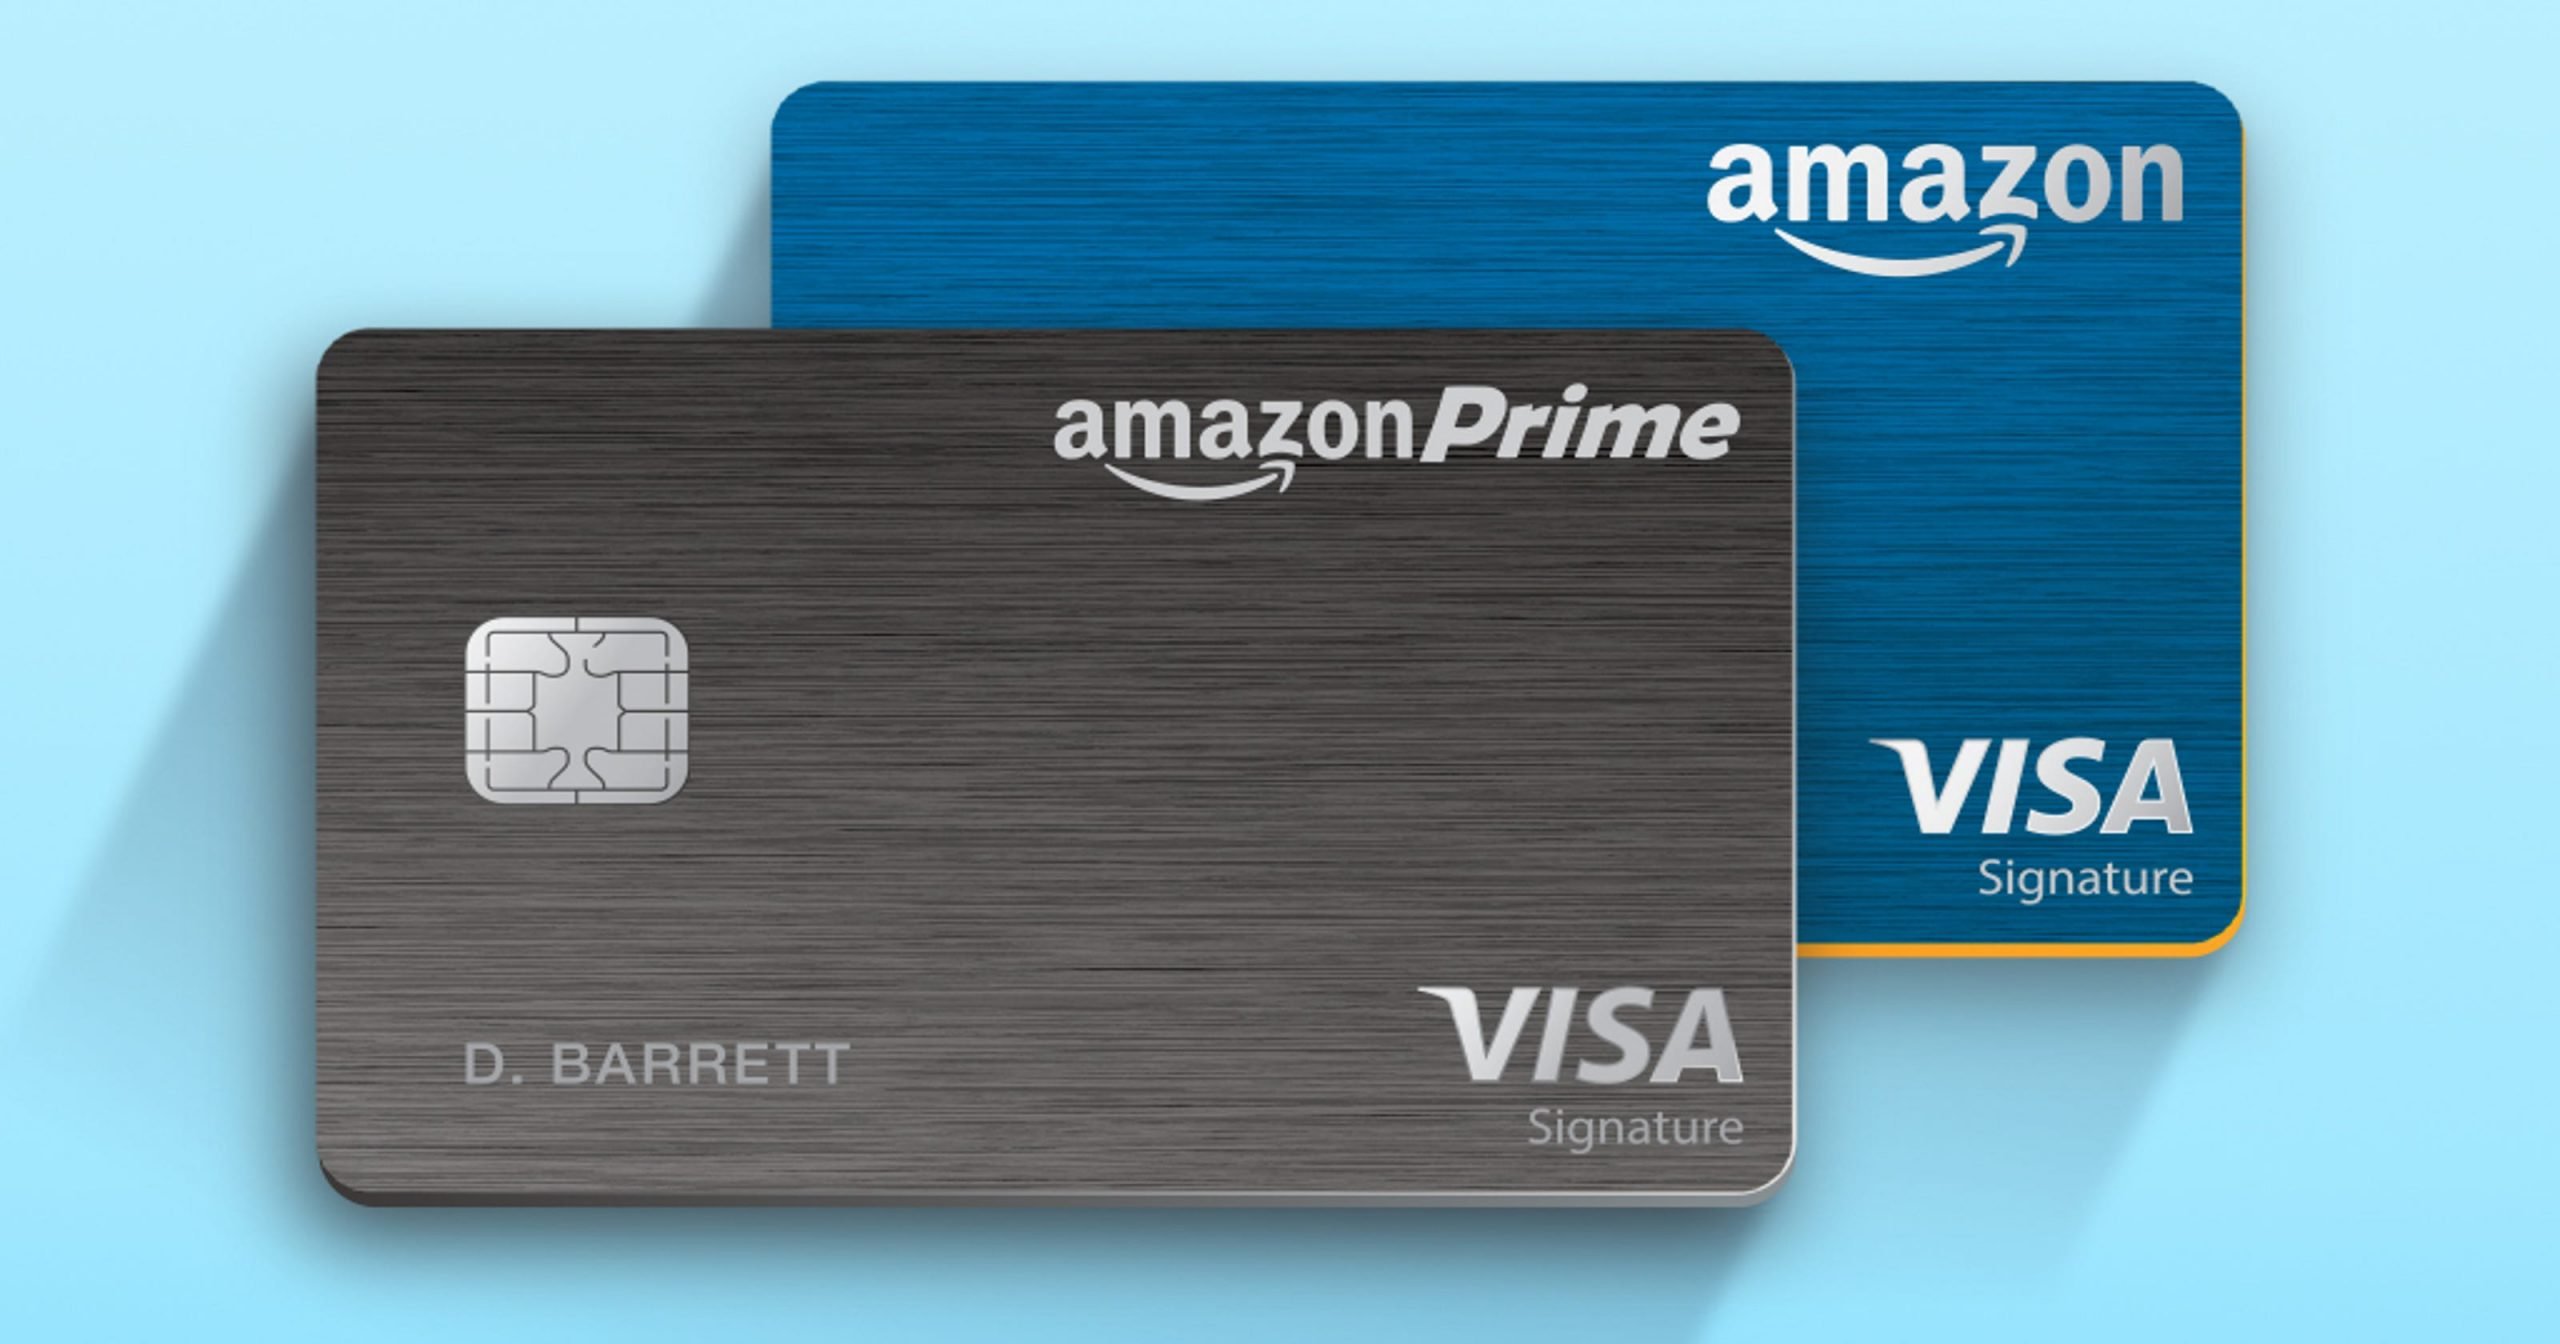 Latest Amazon Prime perk is 5% awards back credit card